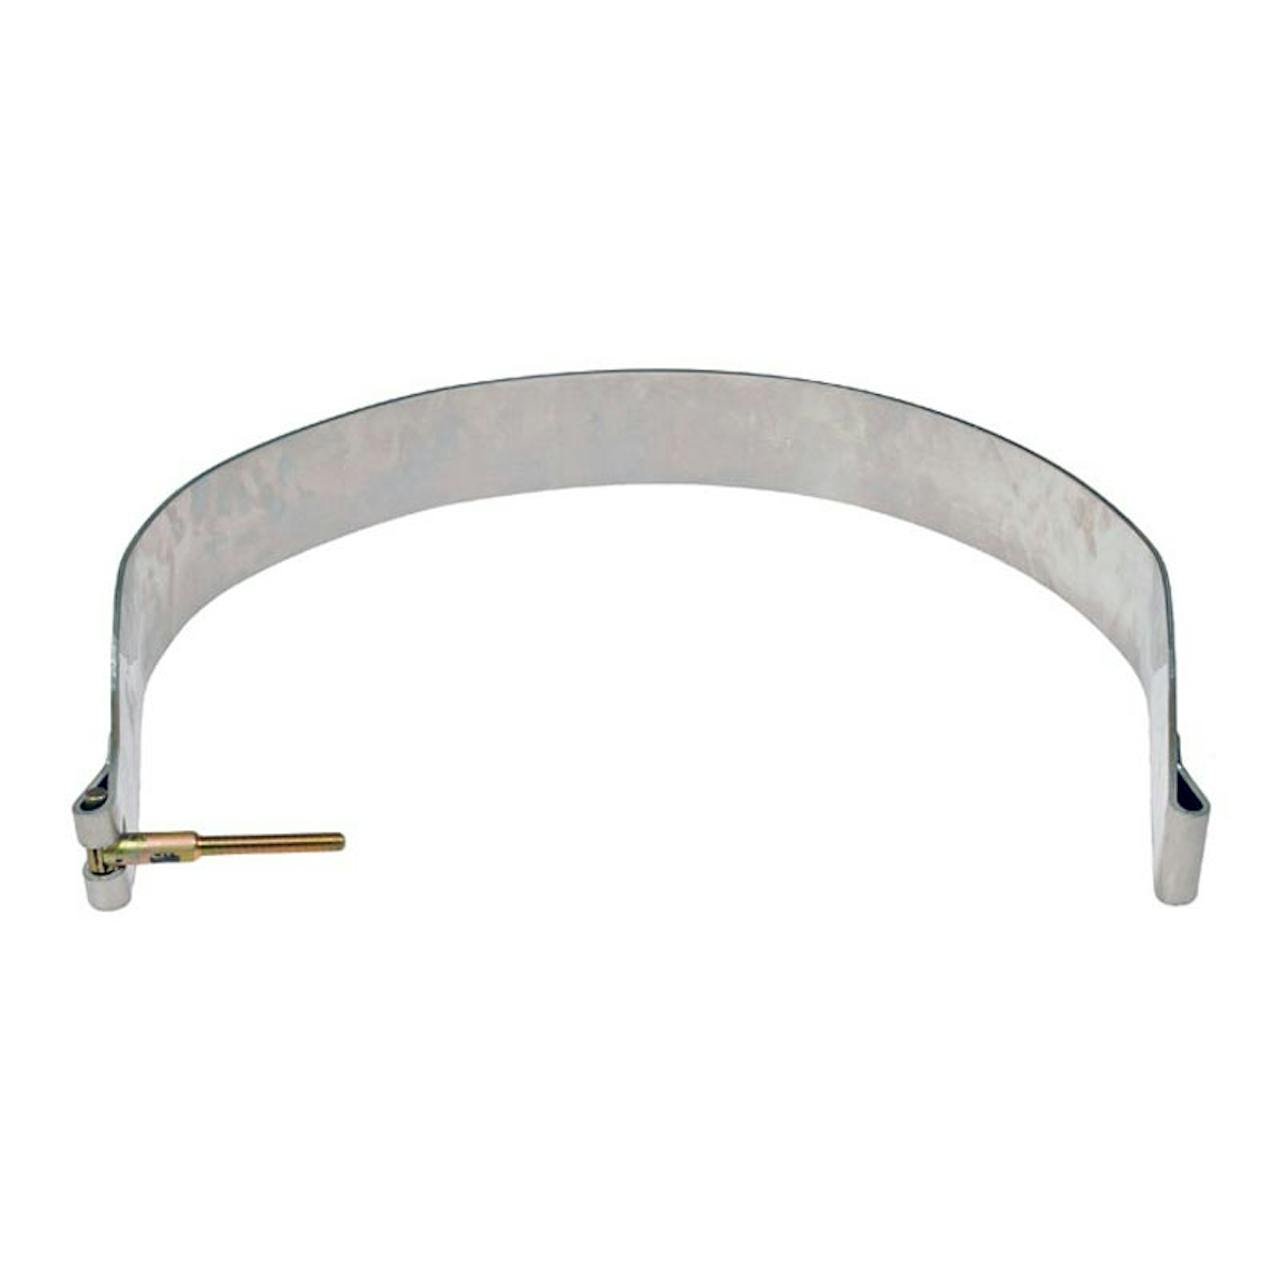 MPParts  61856BX Fuel Tank Strap for D-Shaped Fuel Tanks - 44.5